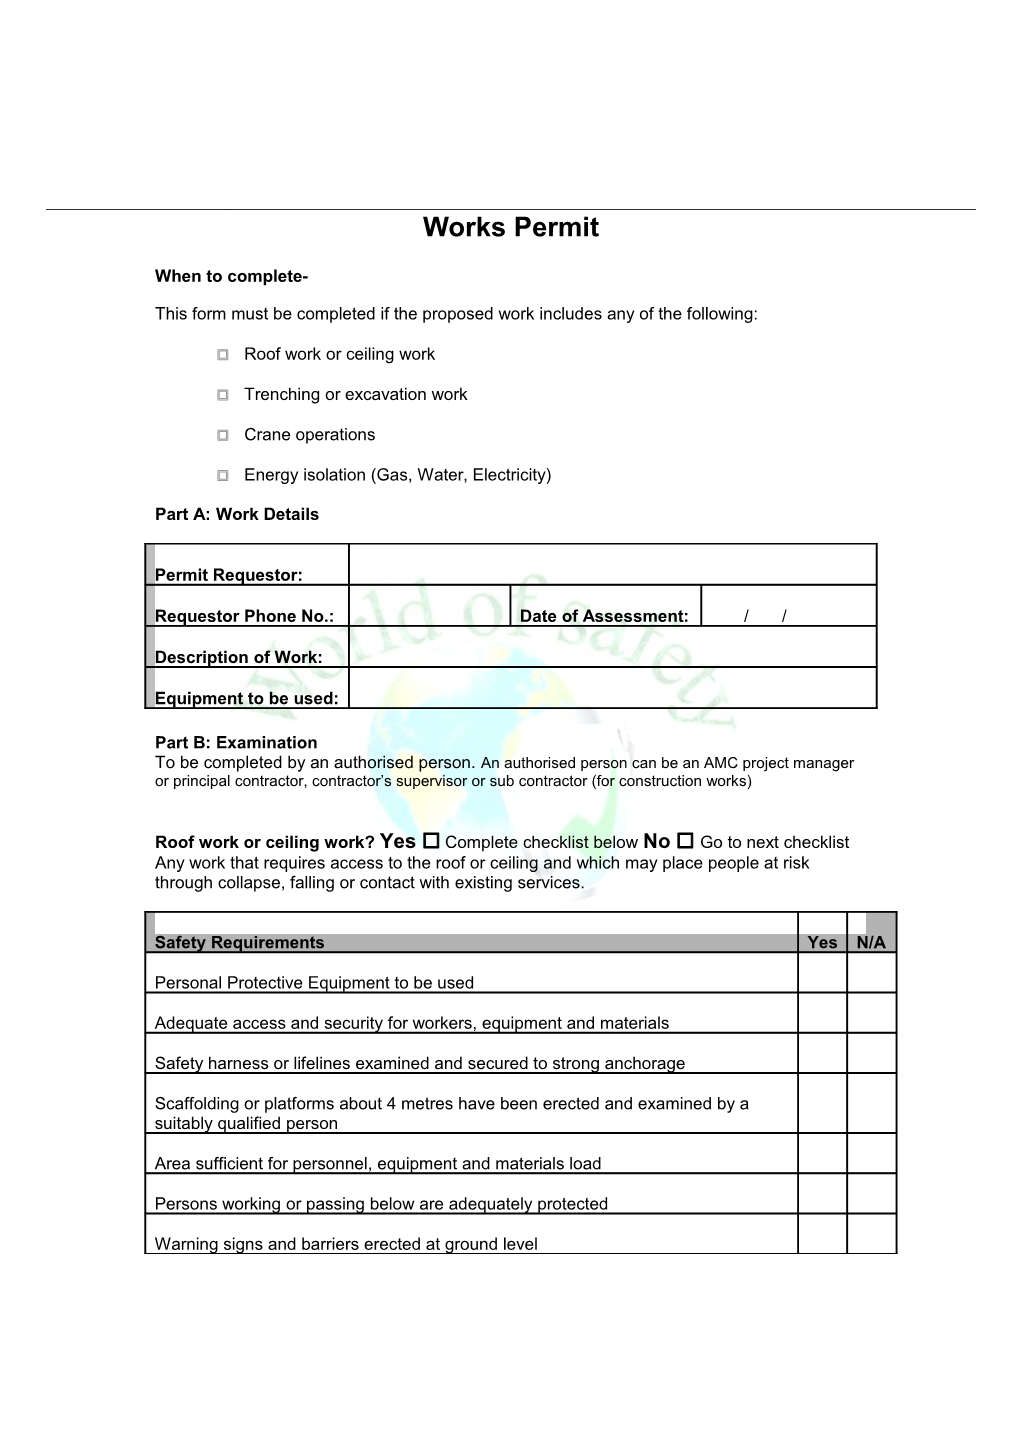 This Form Must Be Completed If the Proposed Work Includes Any of the Following